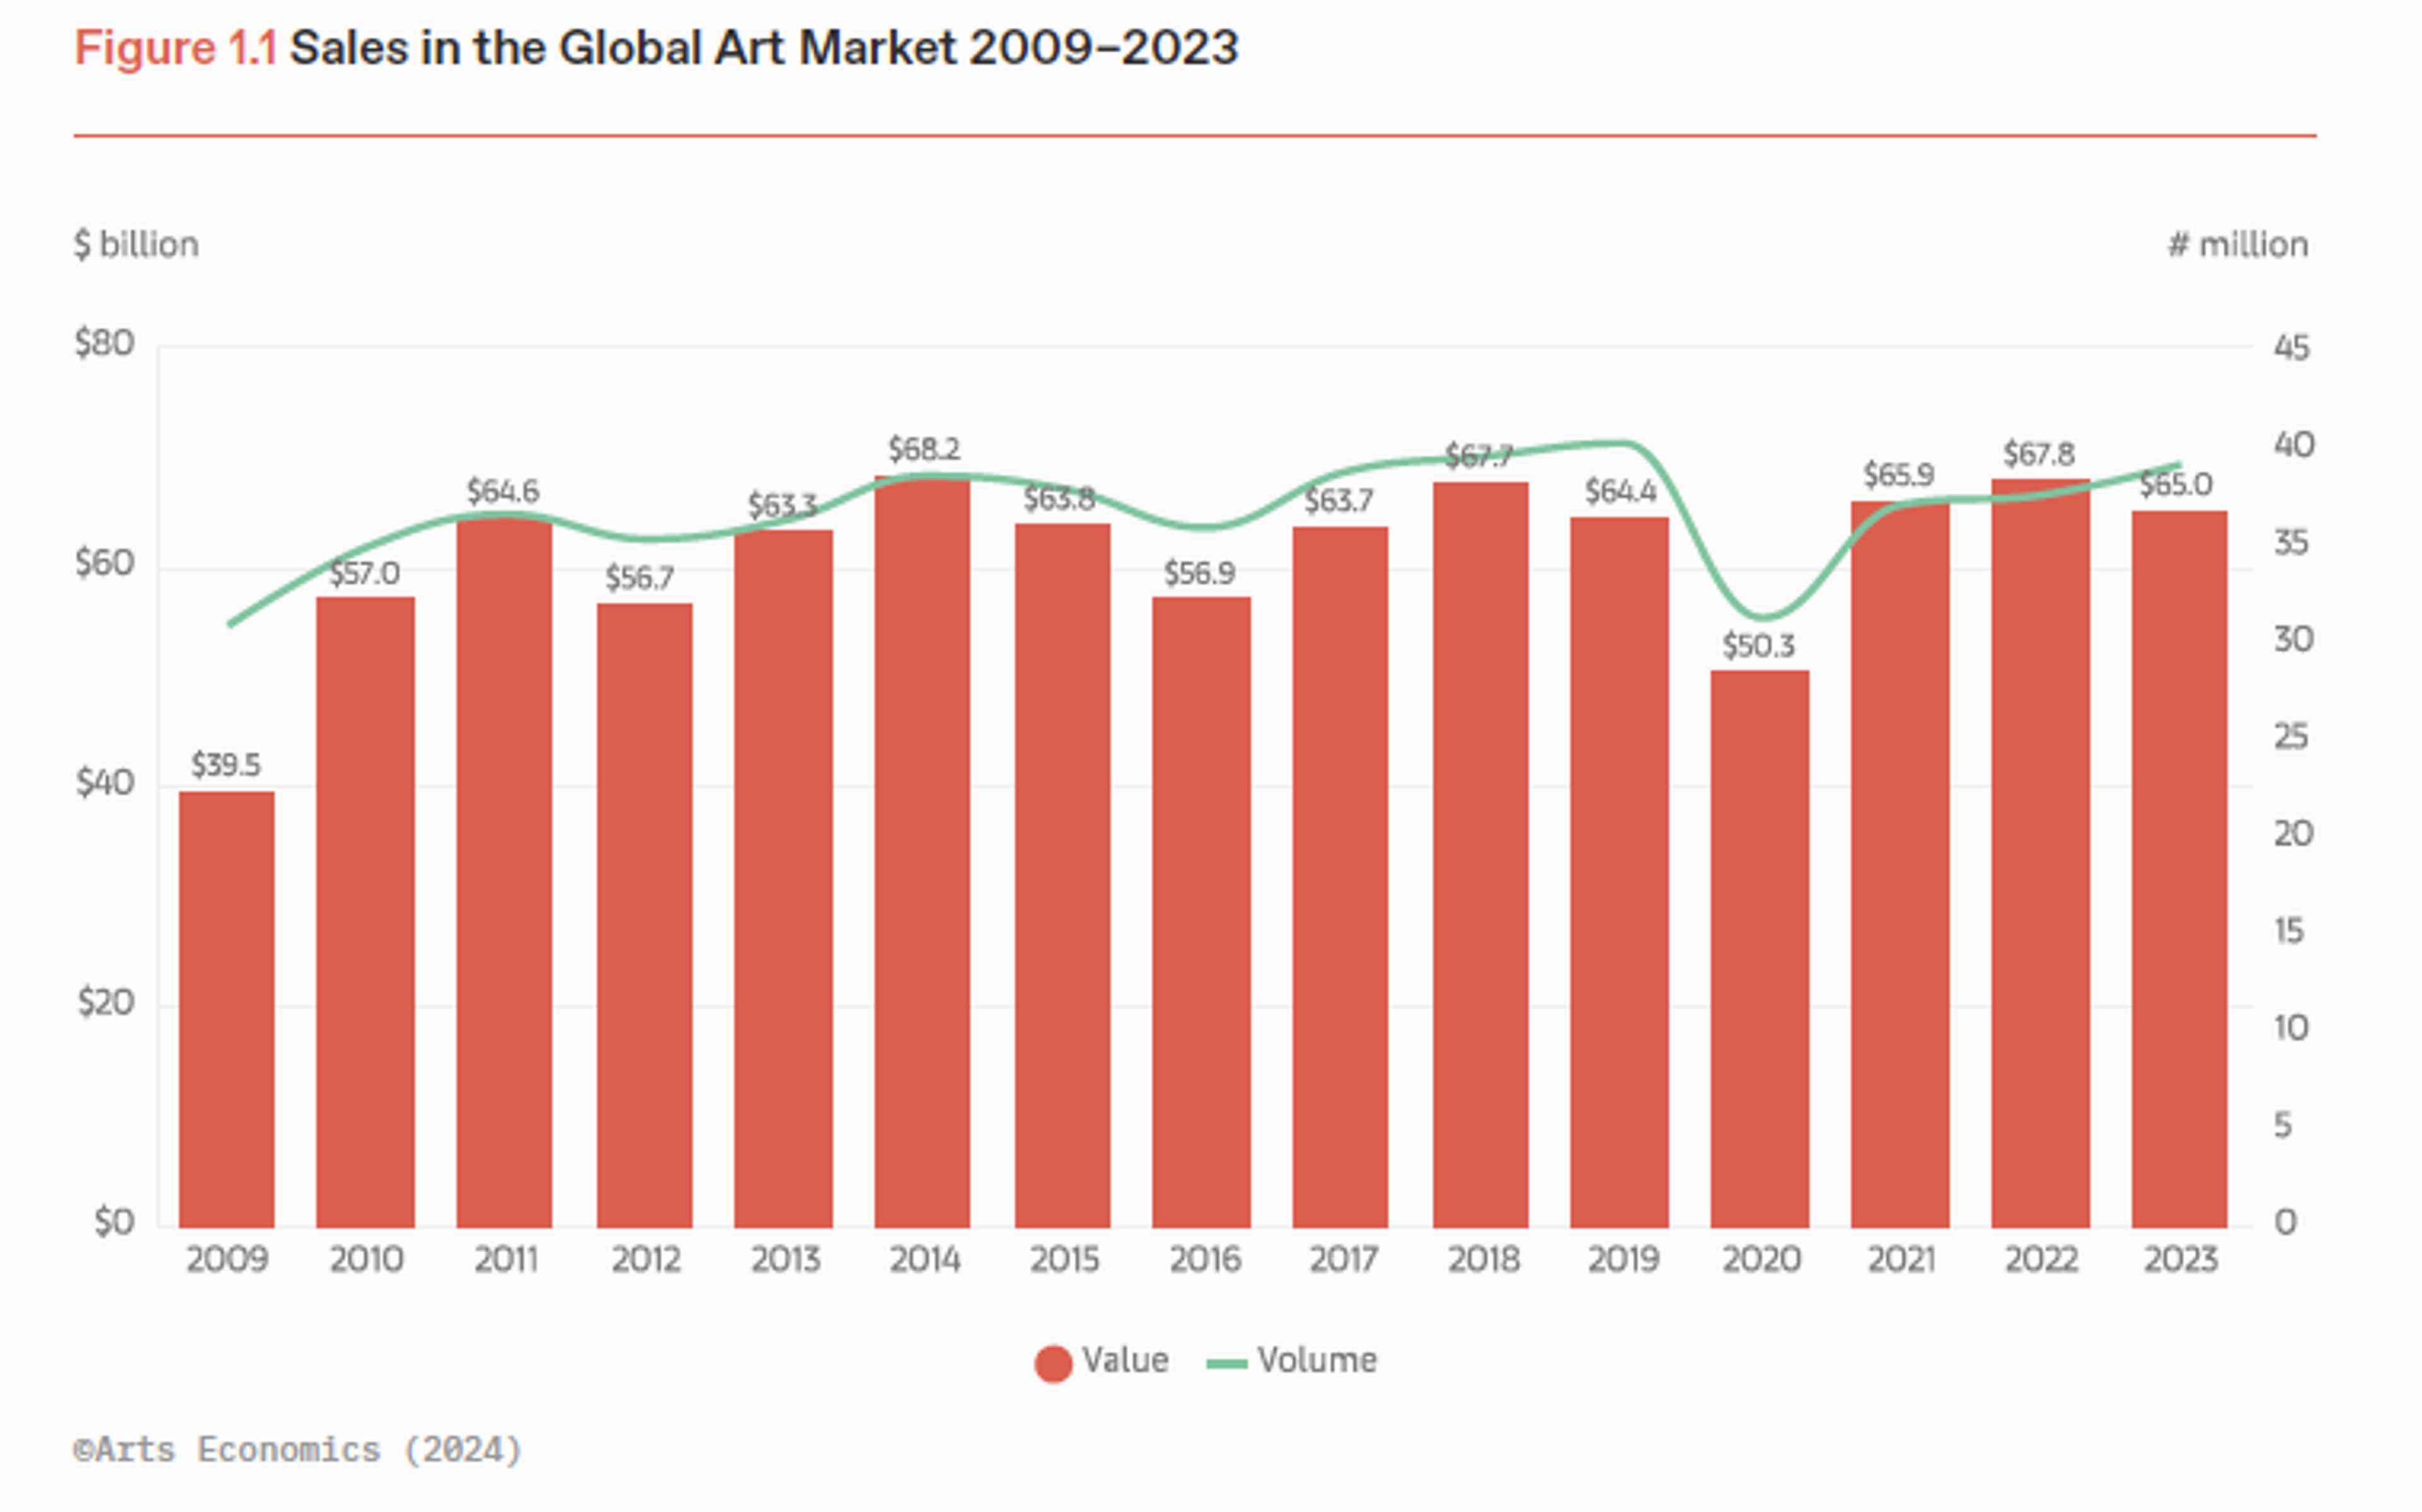 Bar graph of the sales in the global art market from 2009 to 2023.